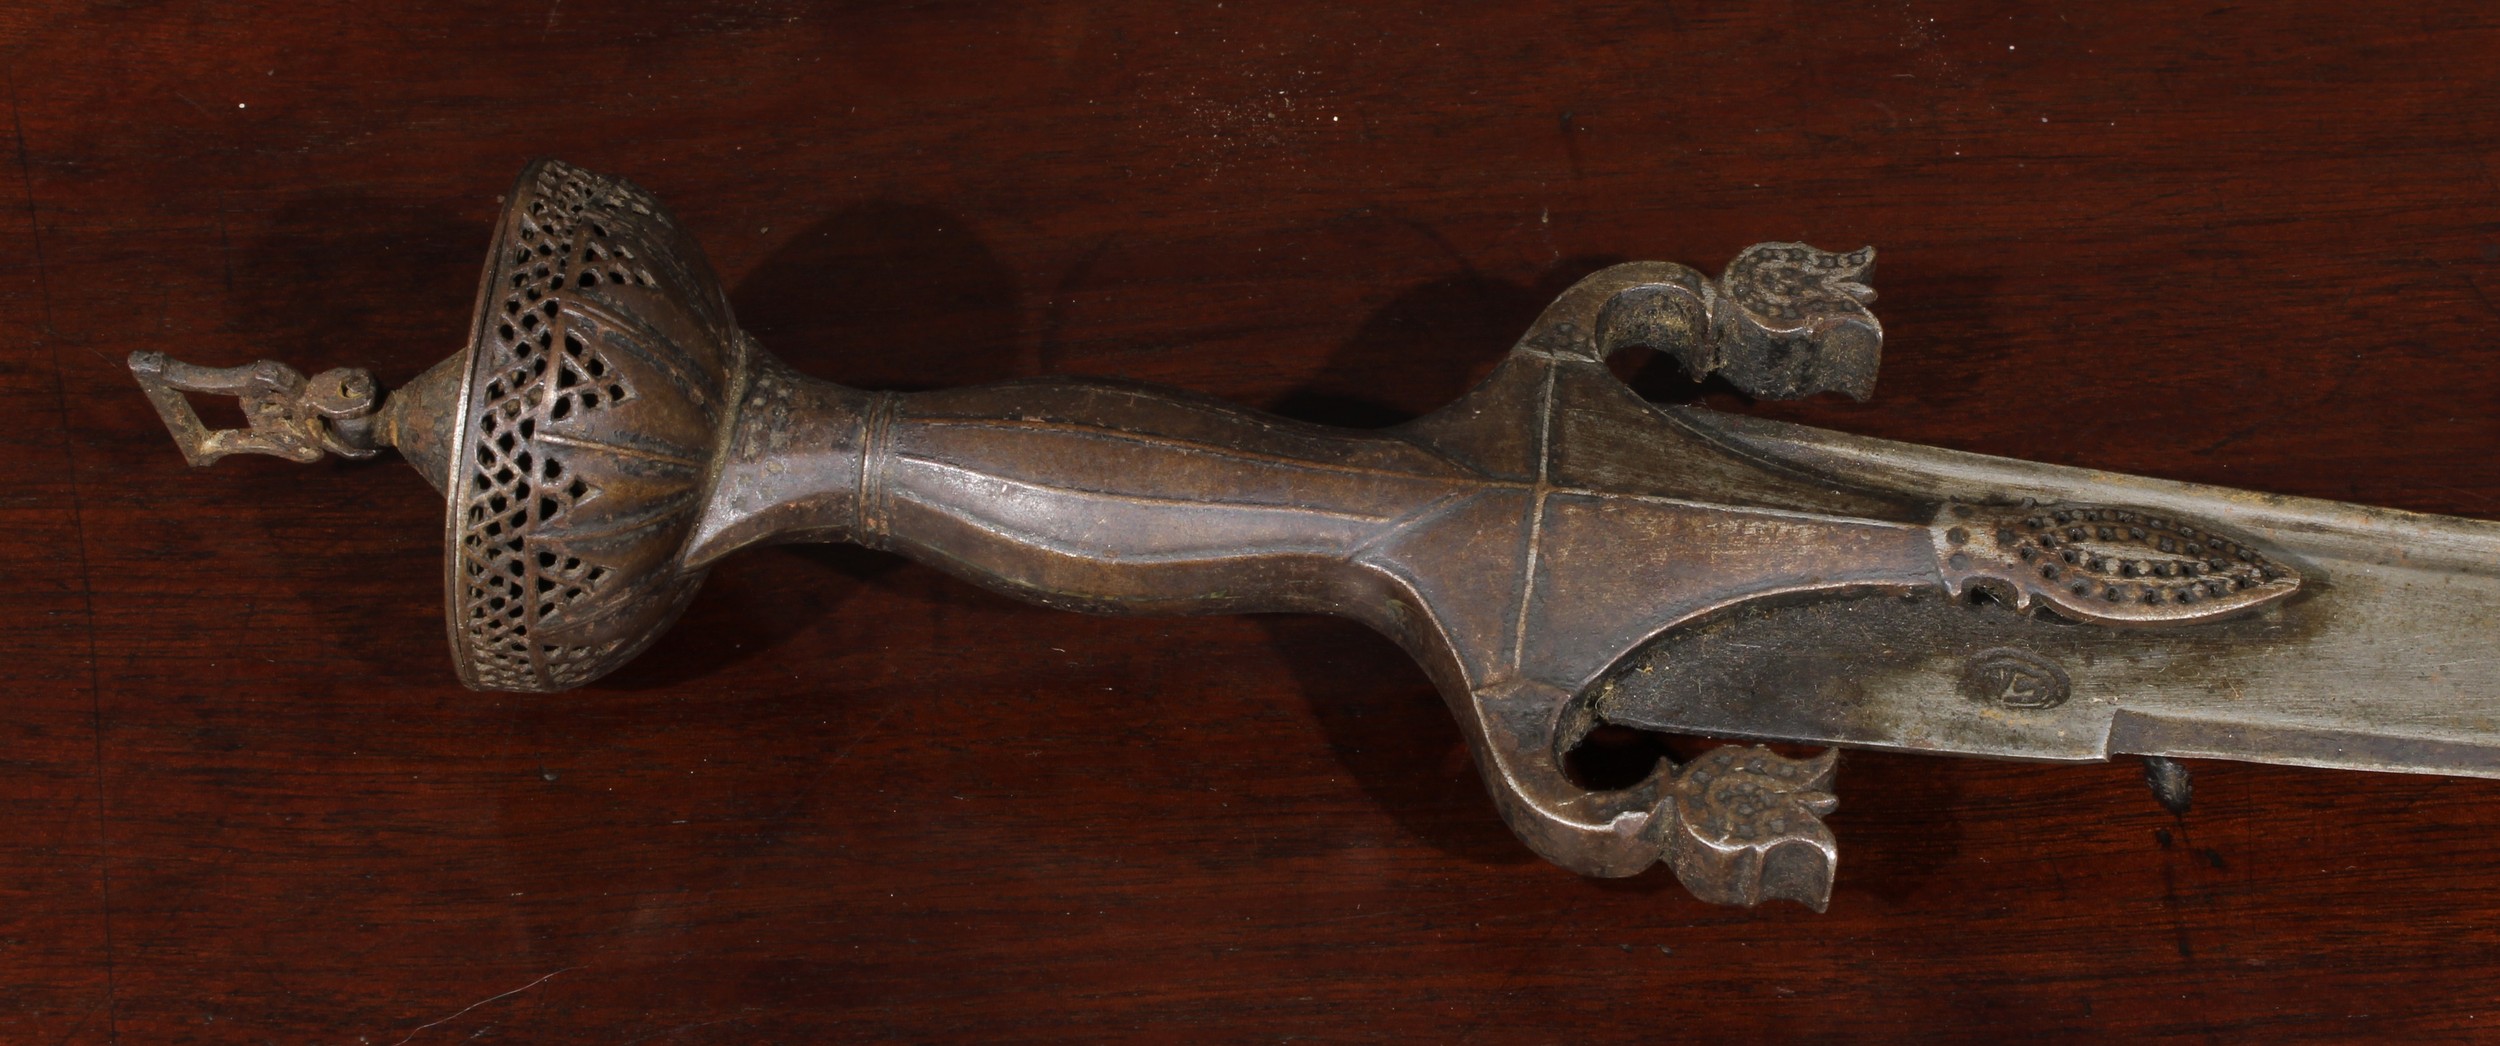 A 19th century Indian talwar, 80cm curved blade with armourer’s marks, steel hilt with lotus - Image 3 of 3